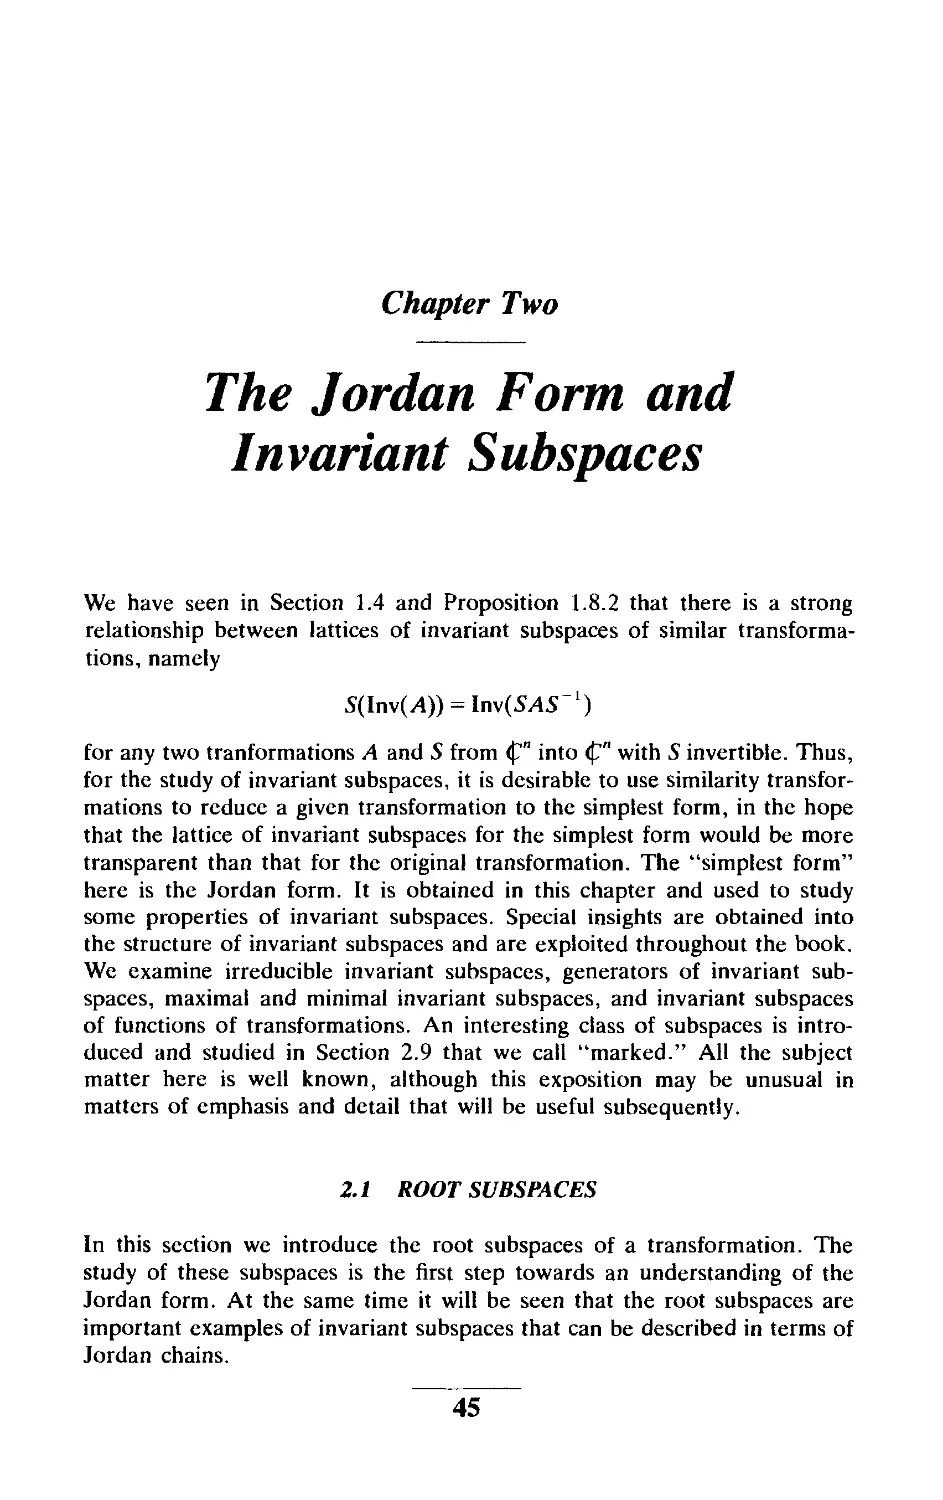 Chapter Two The Jordan Form and Invariant Subspaces